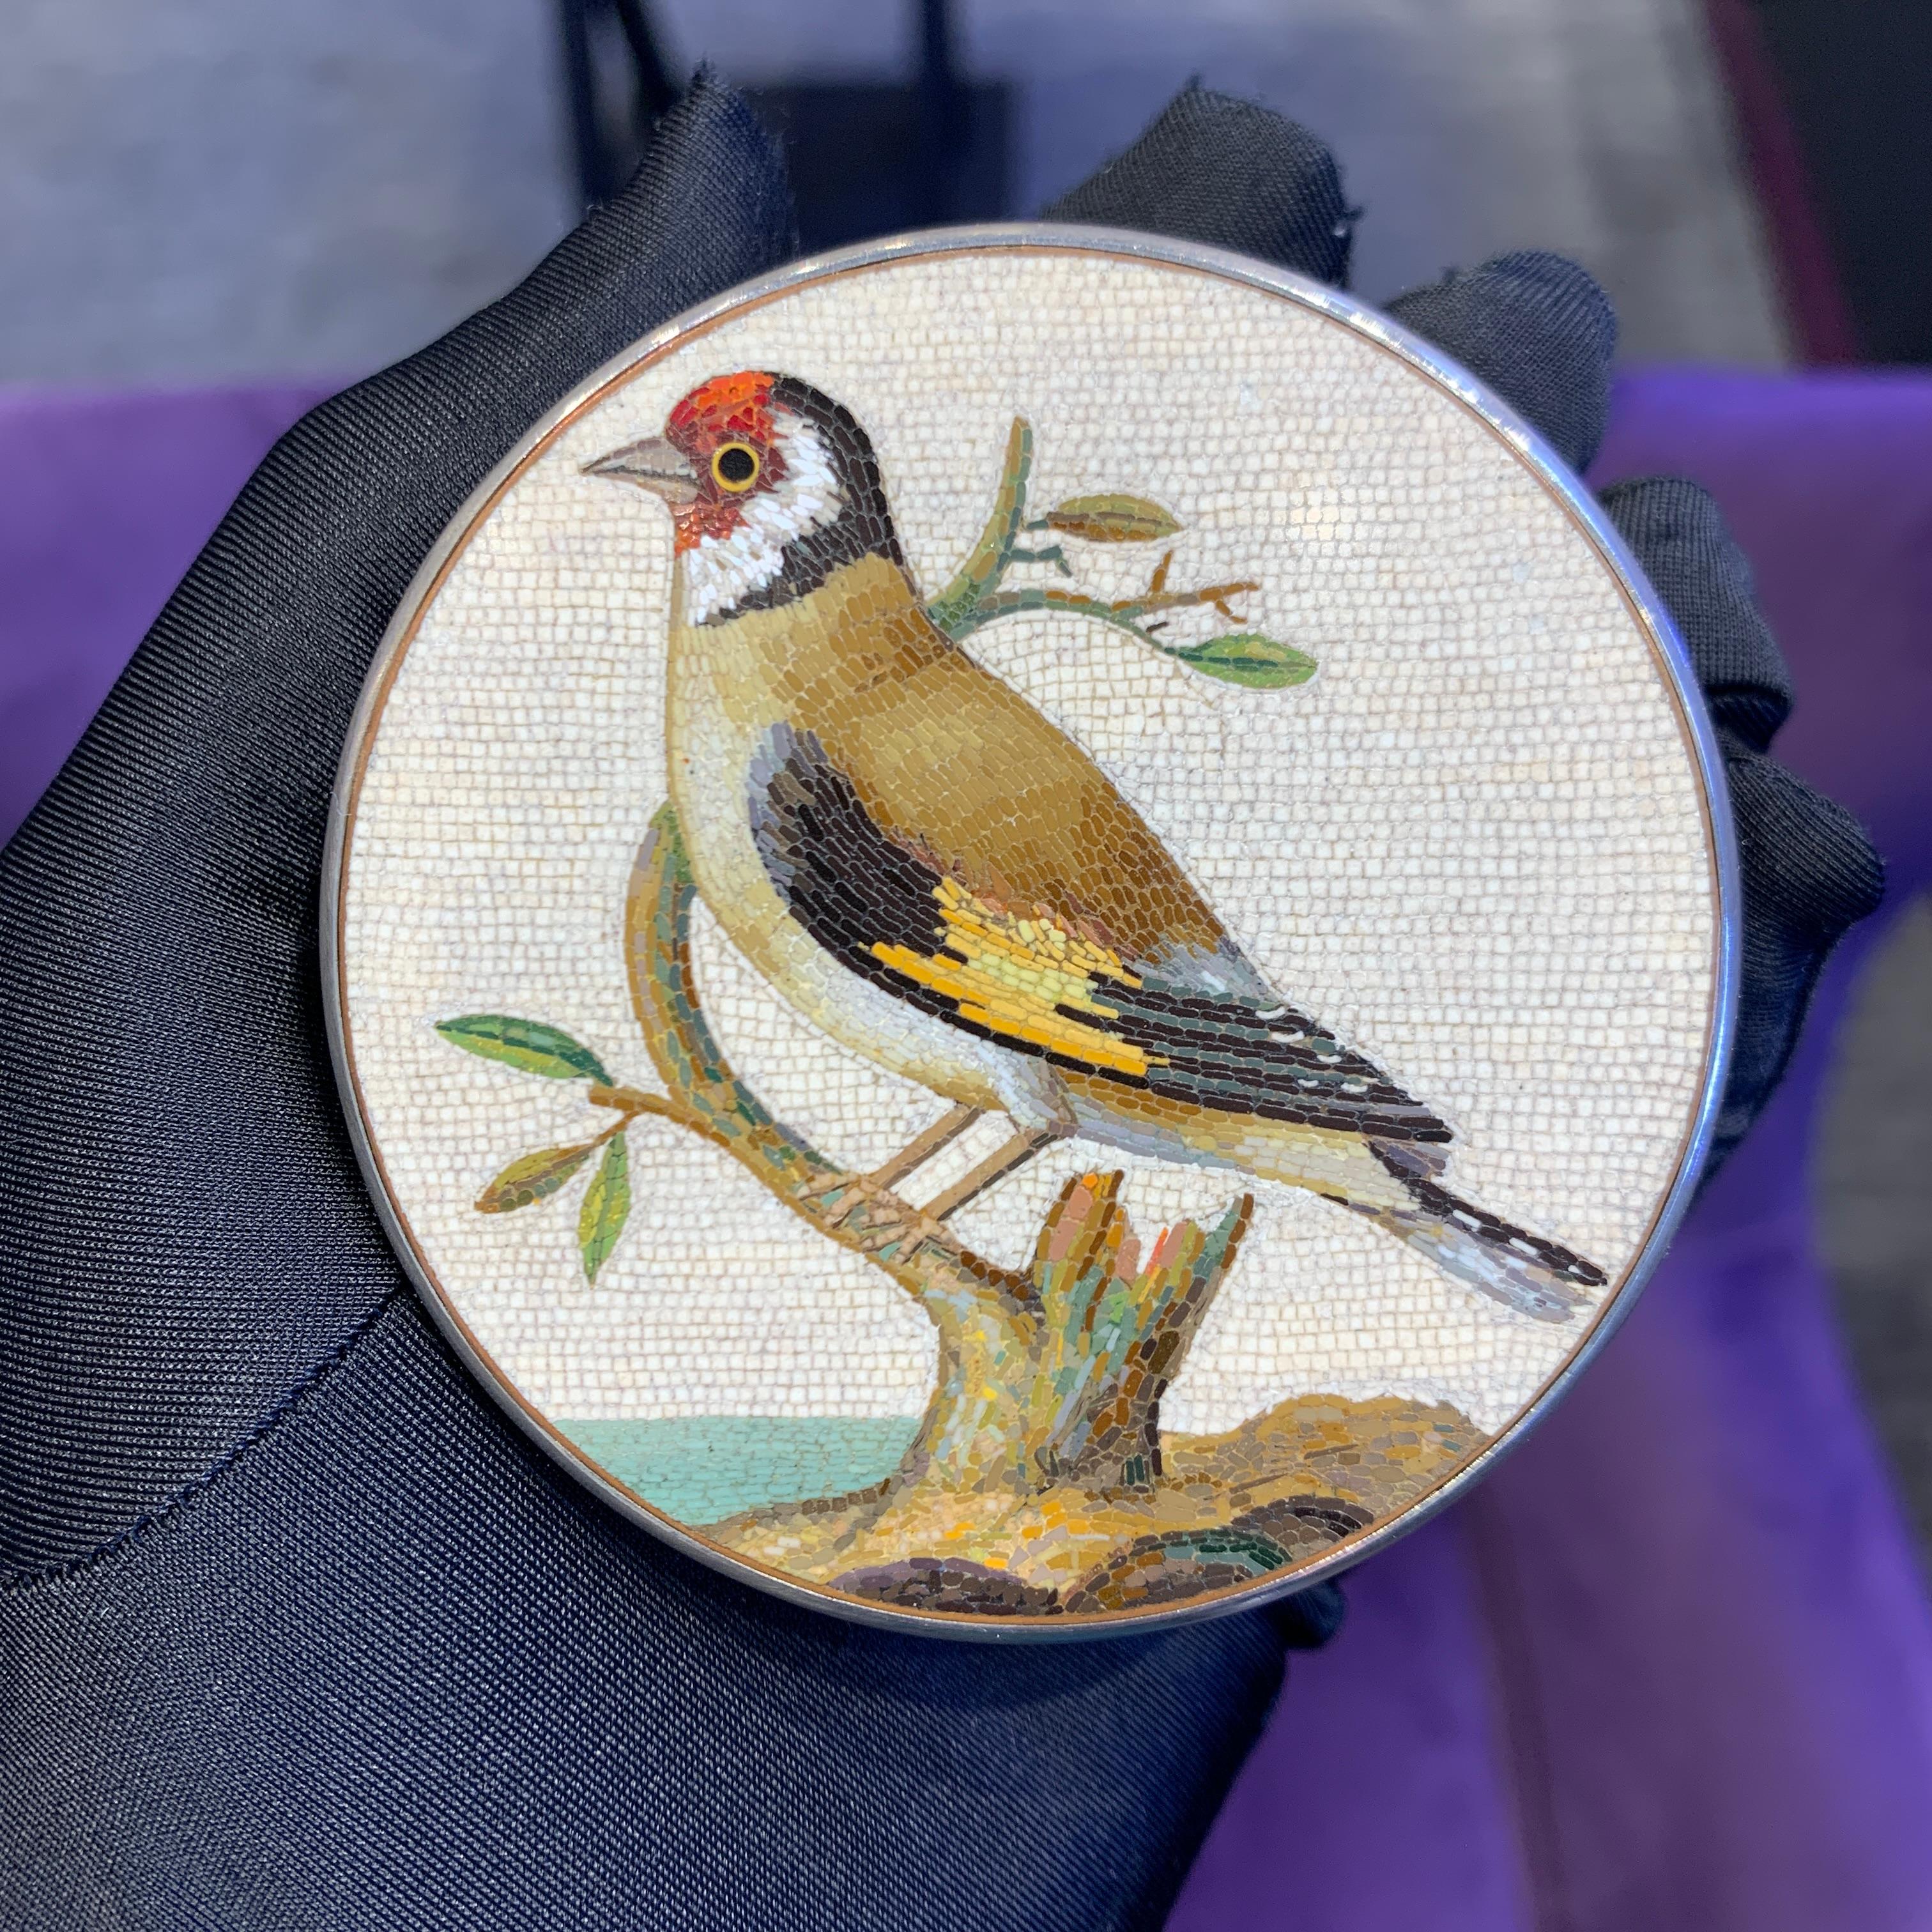 18th Century Goldfinch Micro Mosaic Box

A sterling silver box with felt lining and a lid set with a stunningly detailed micro mosaic of a European Goldfinch perched on a branch. The micro mosaic is attributed to the late 18th  century artist